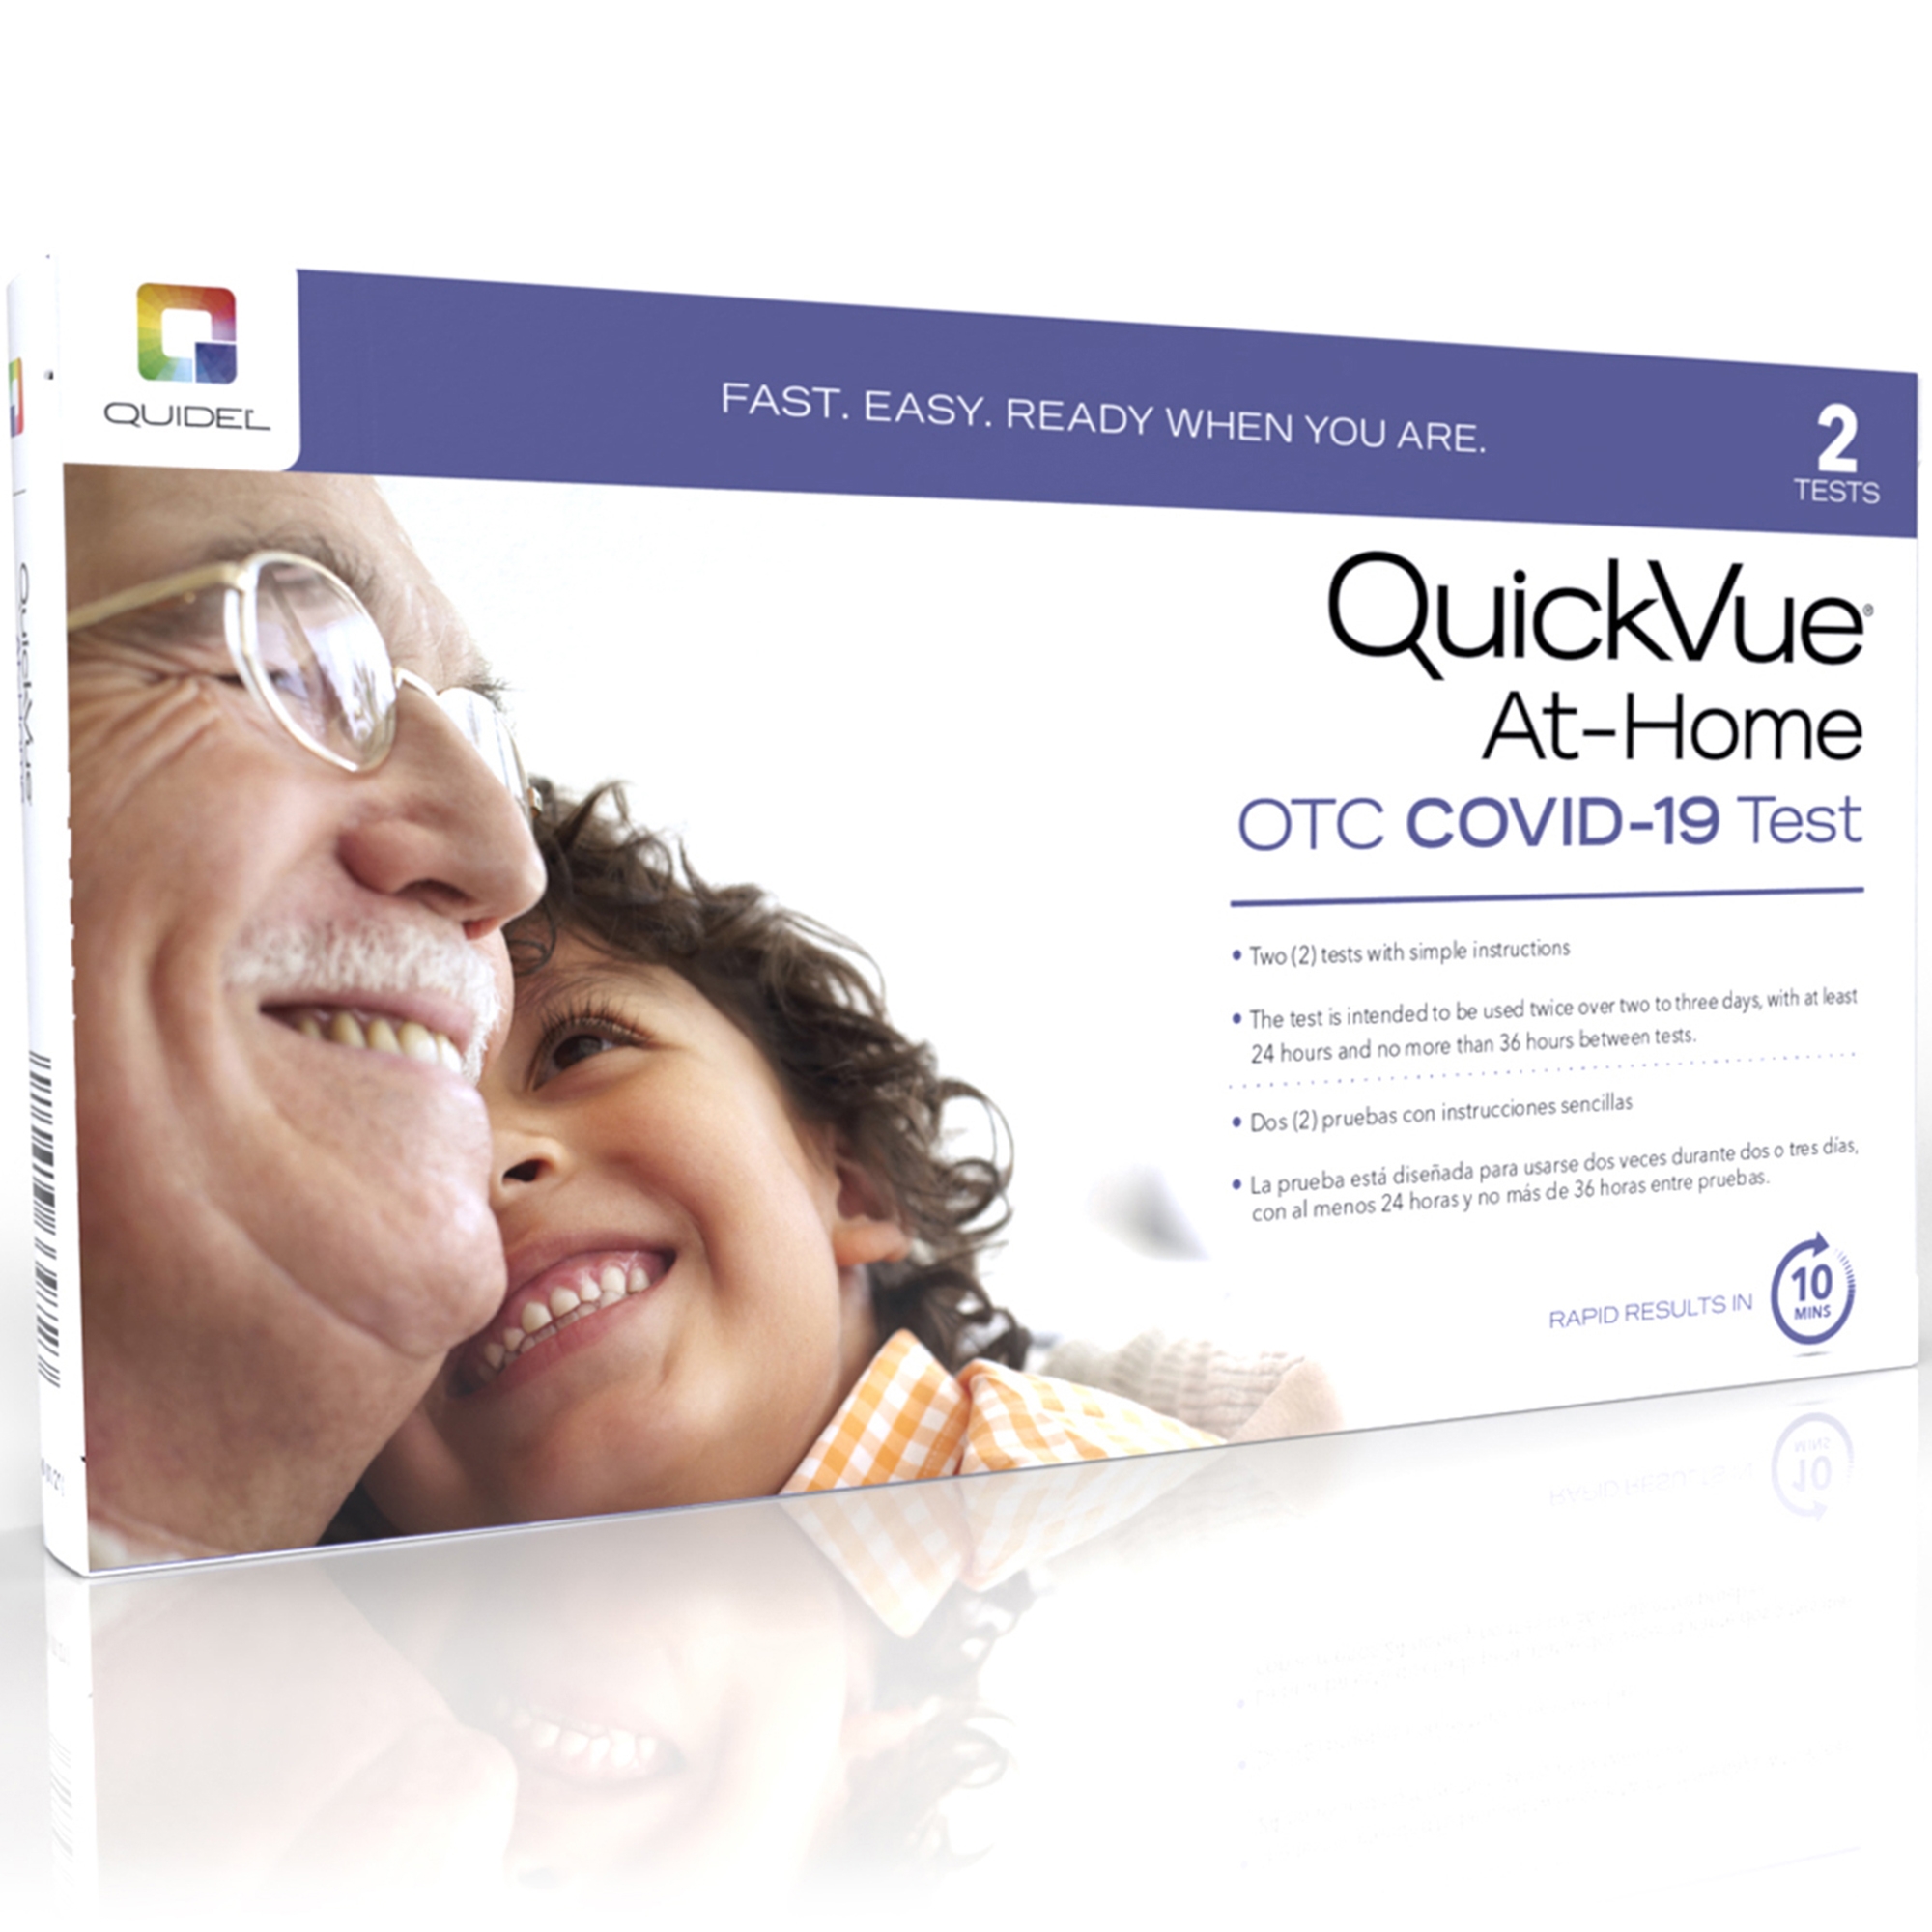 Quidel QuickVue At-Home COVID-19 Test - 10 Minute Results at Home - image 2 of 7